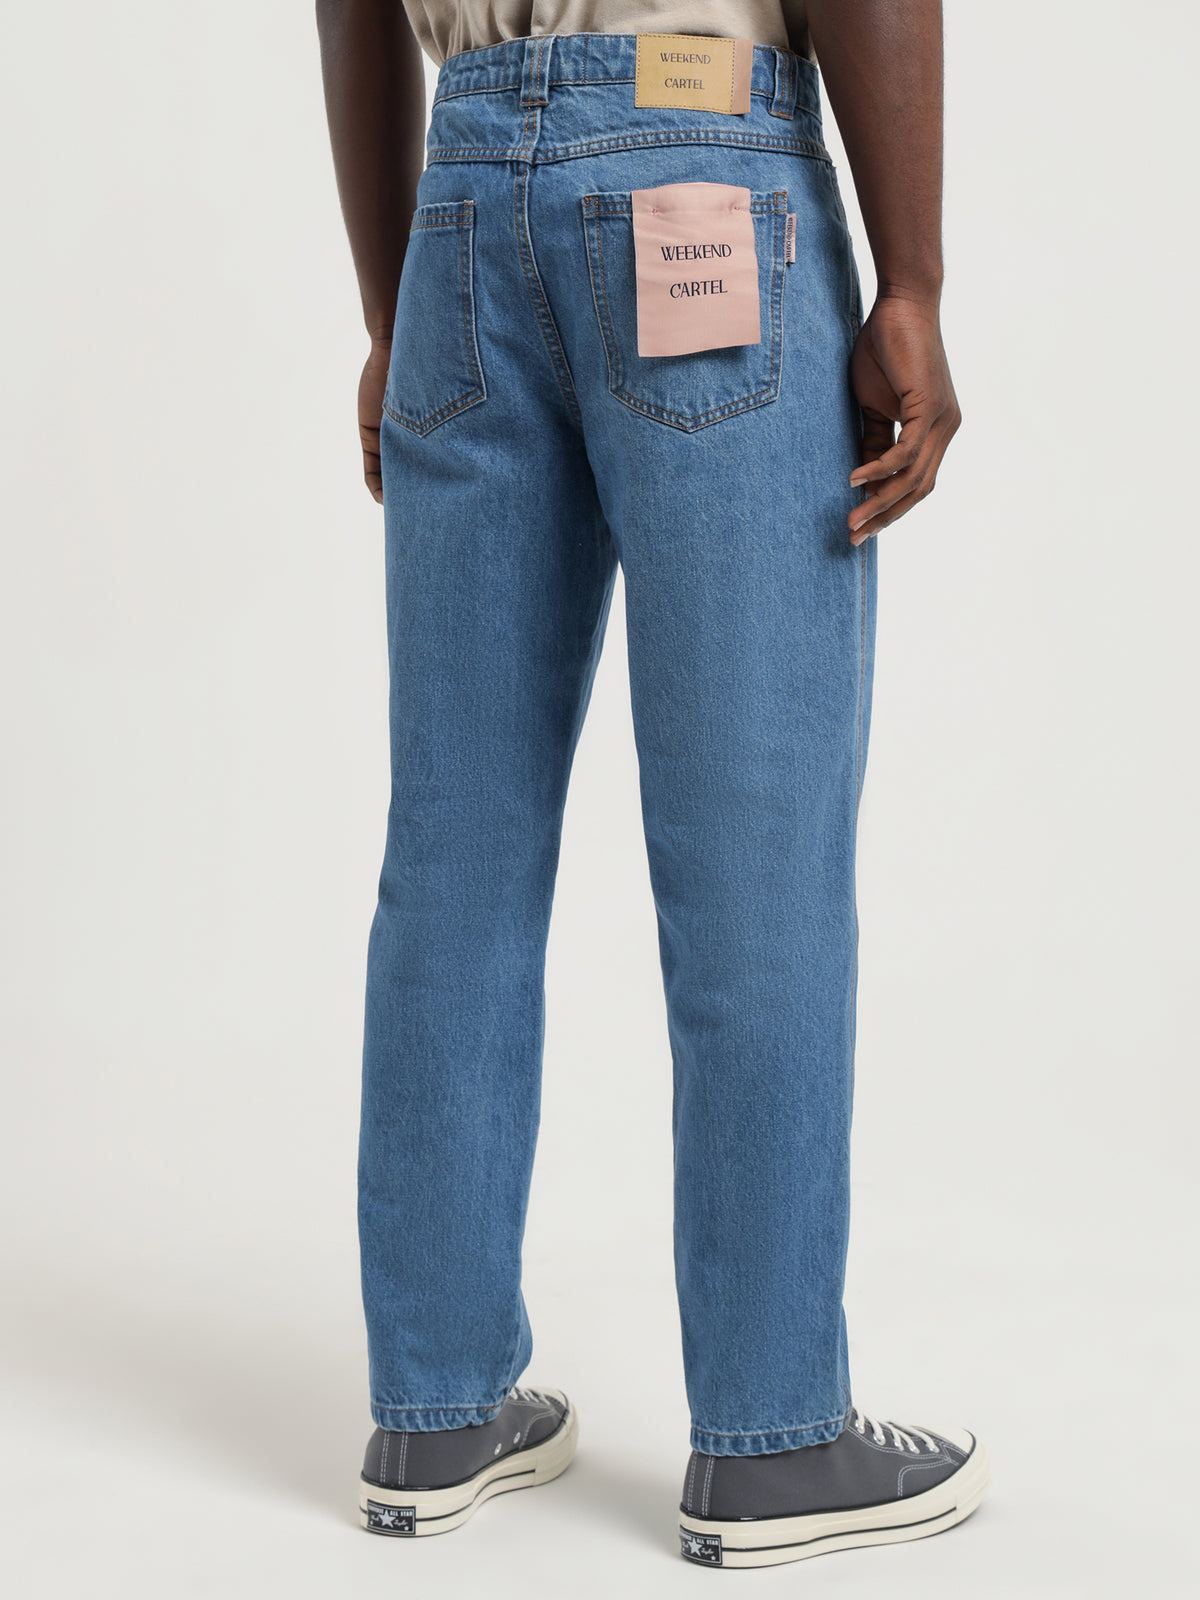 Chaos Straight Jeans in Retro Blue